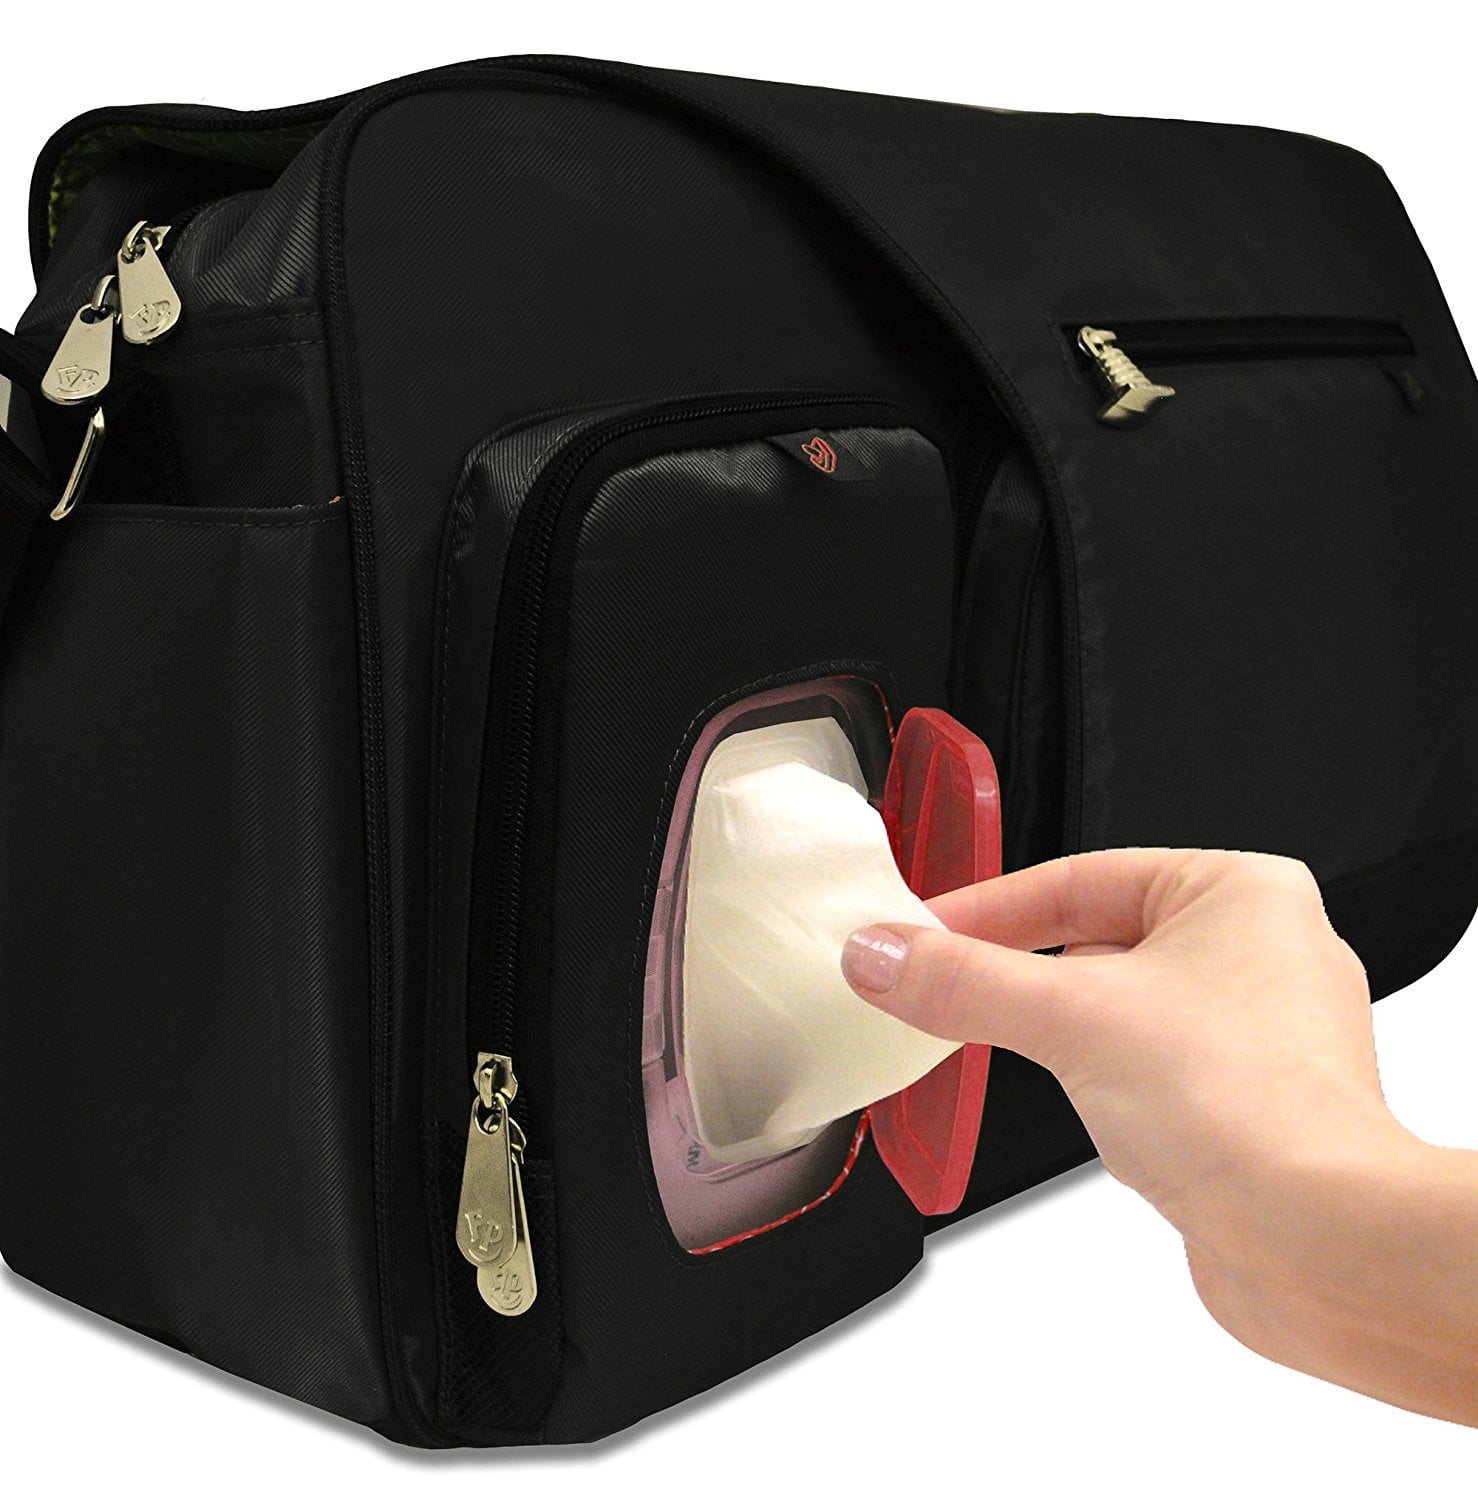 diaper backpack with wipe dispenser